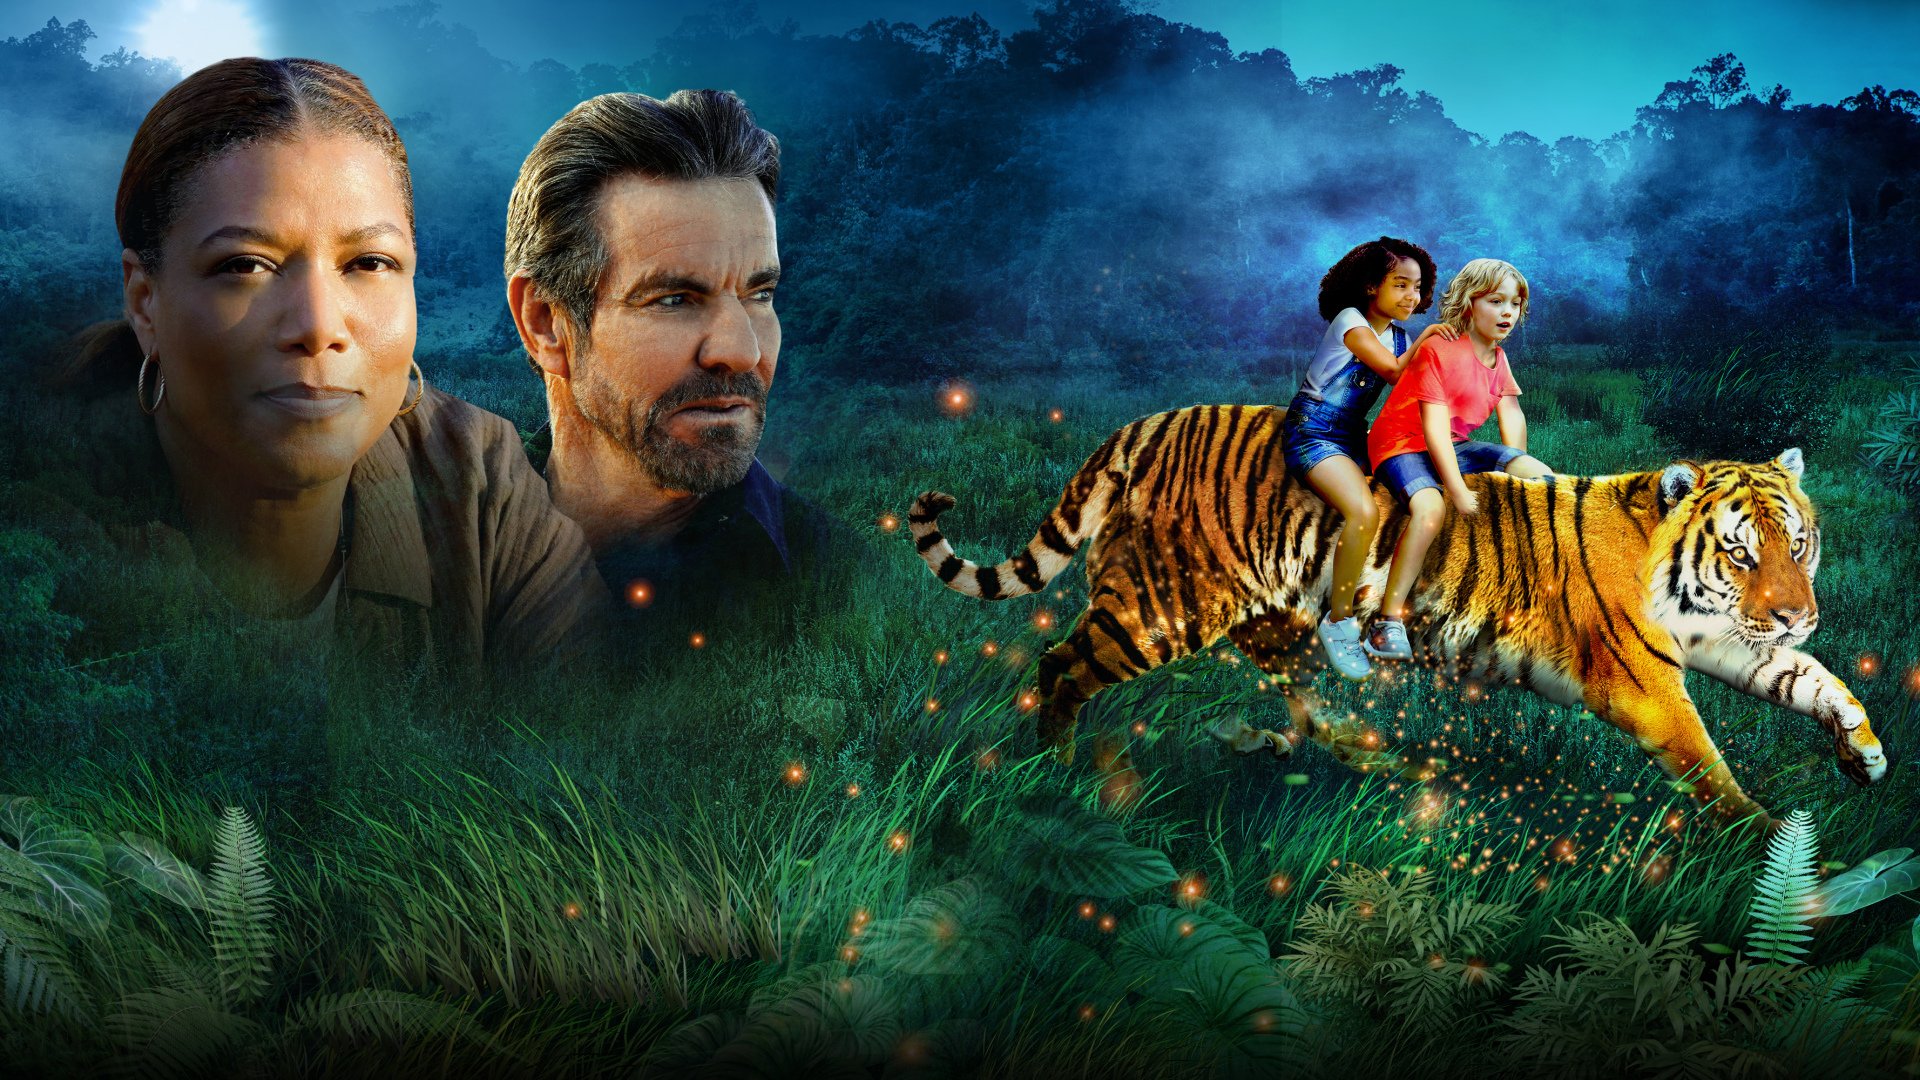 Bengal Tiger Full Movie Online Watch Bengal Tiger in Full HD Quality